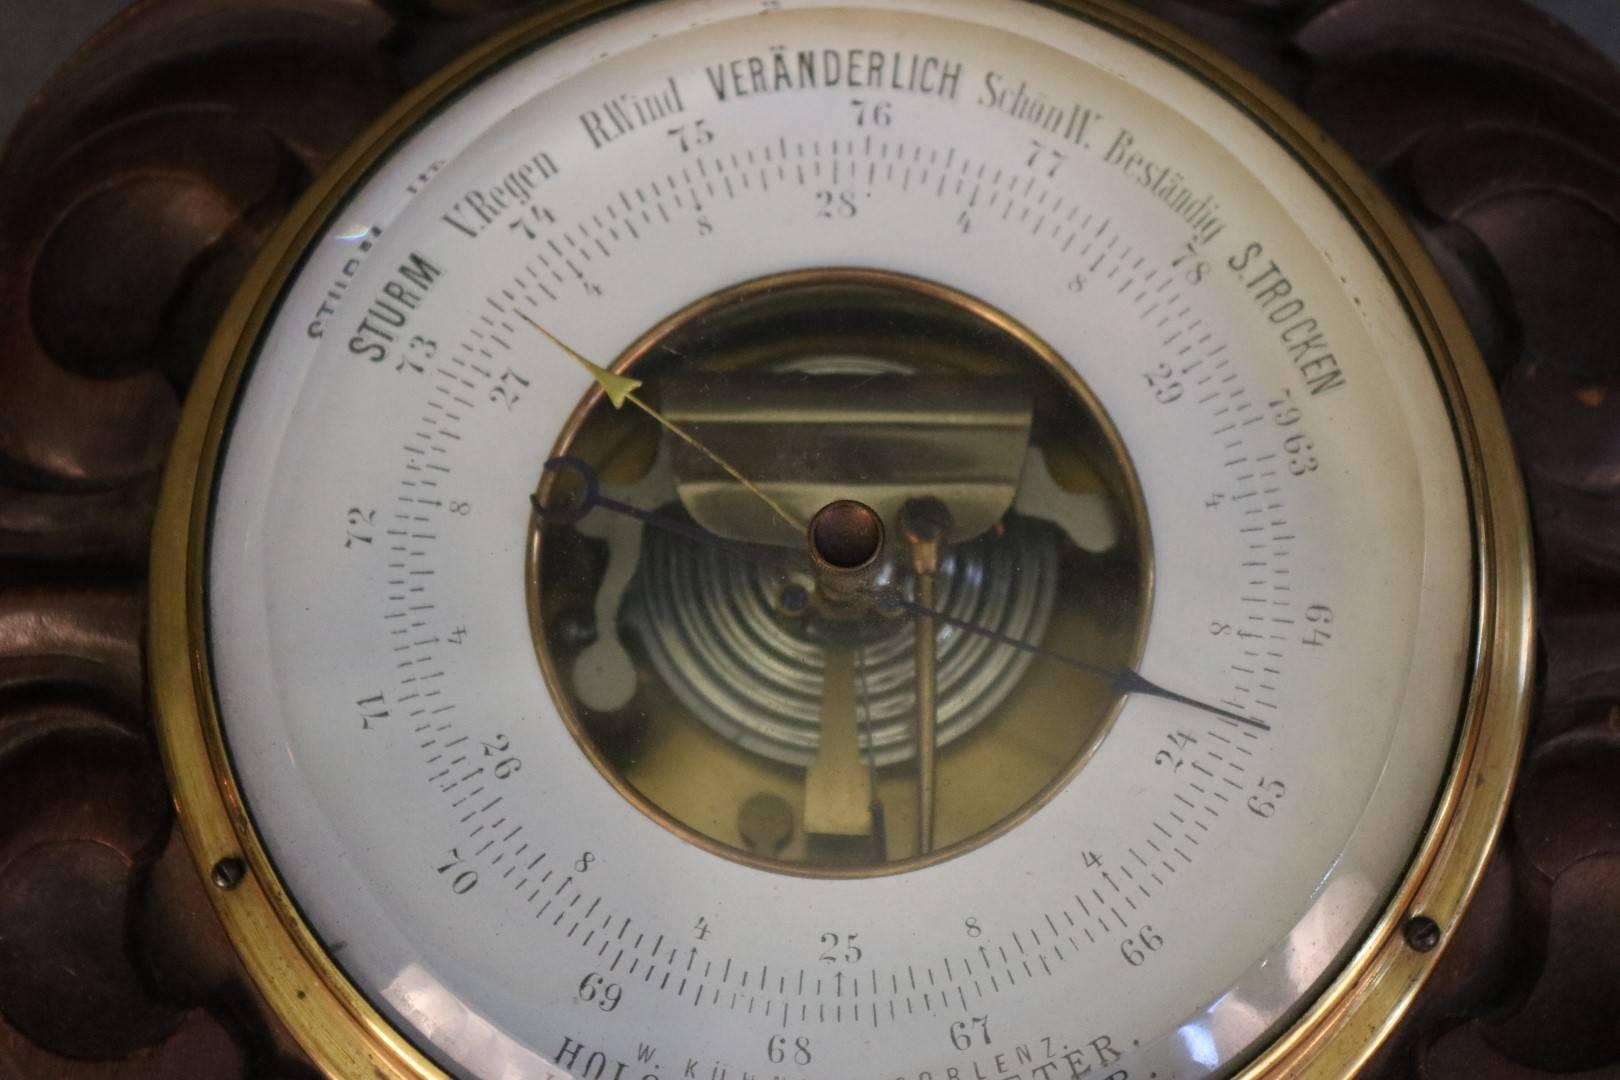 Polysteric barometer with carved wood backing. Readings in German. Manufacturered by W. Kuhanu Coblenz. Dimensions: 5" face D x 11" x 8" with base.